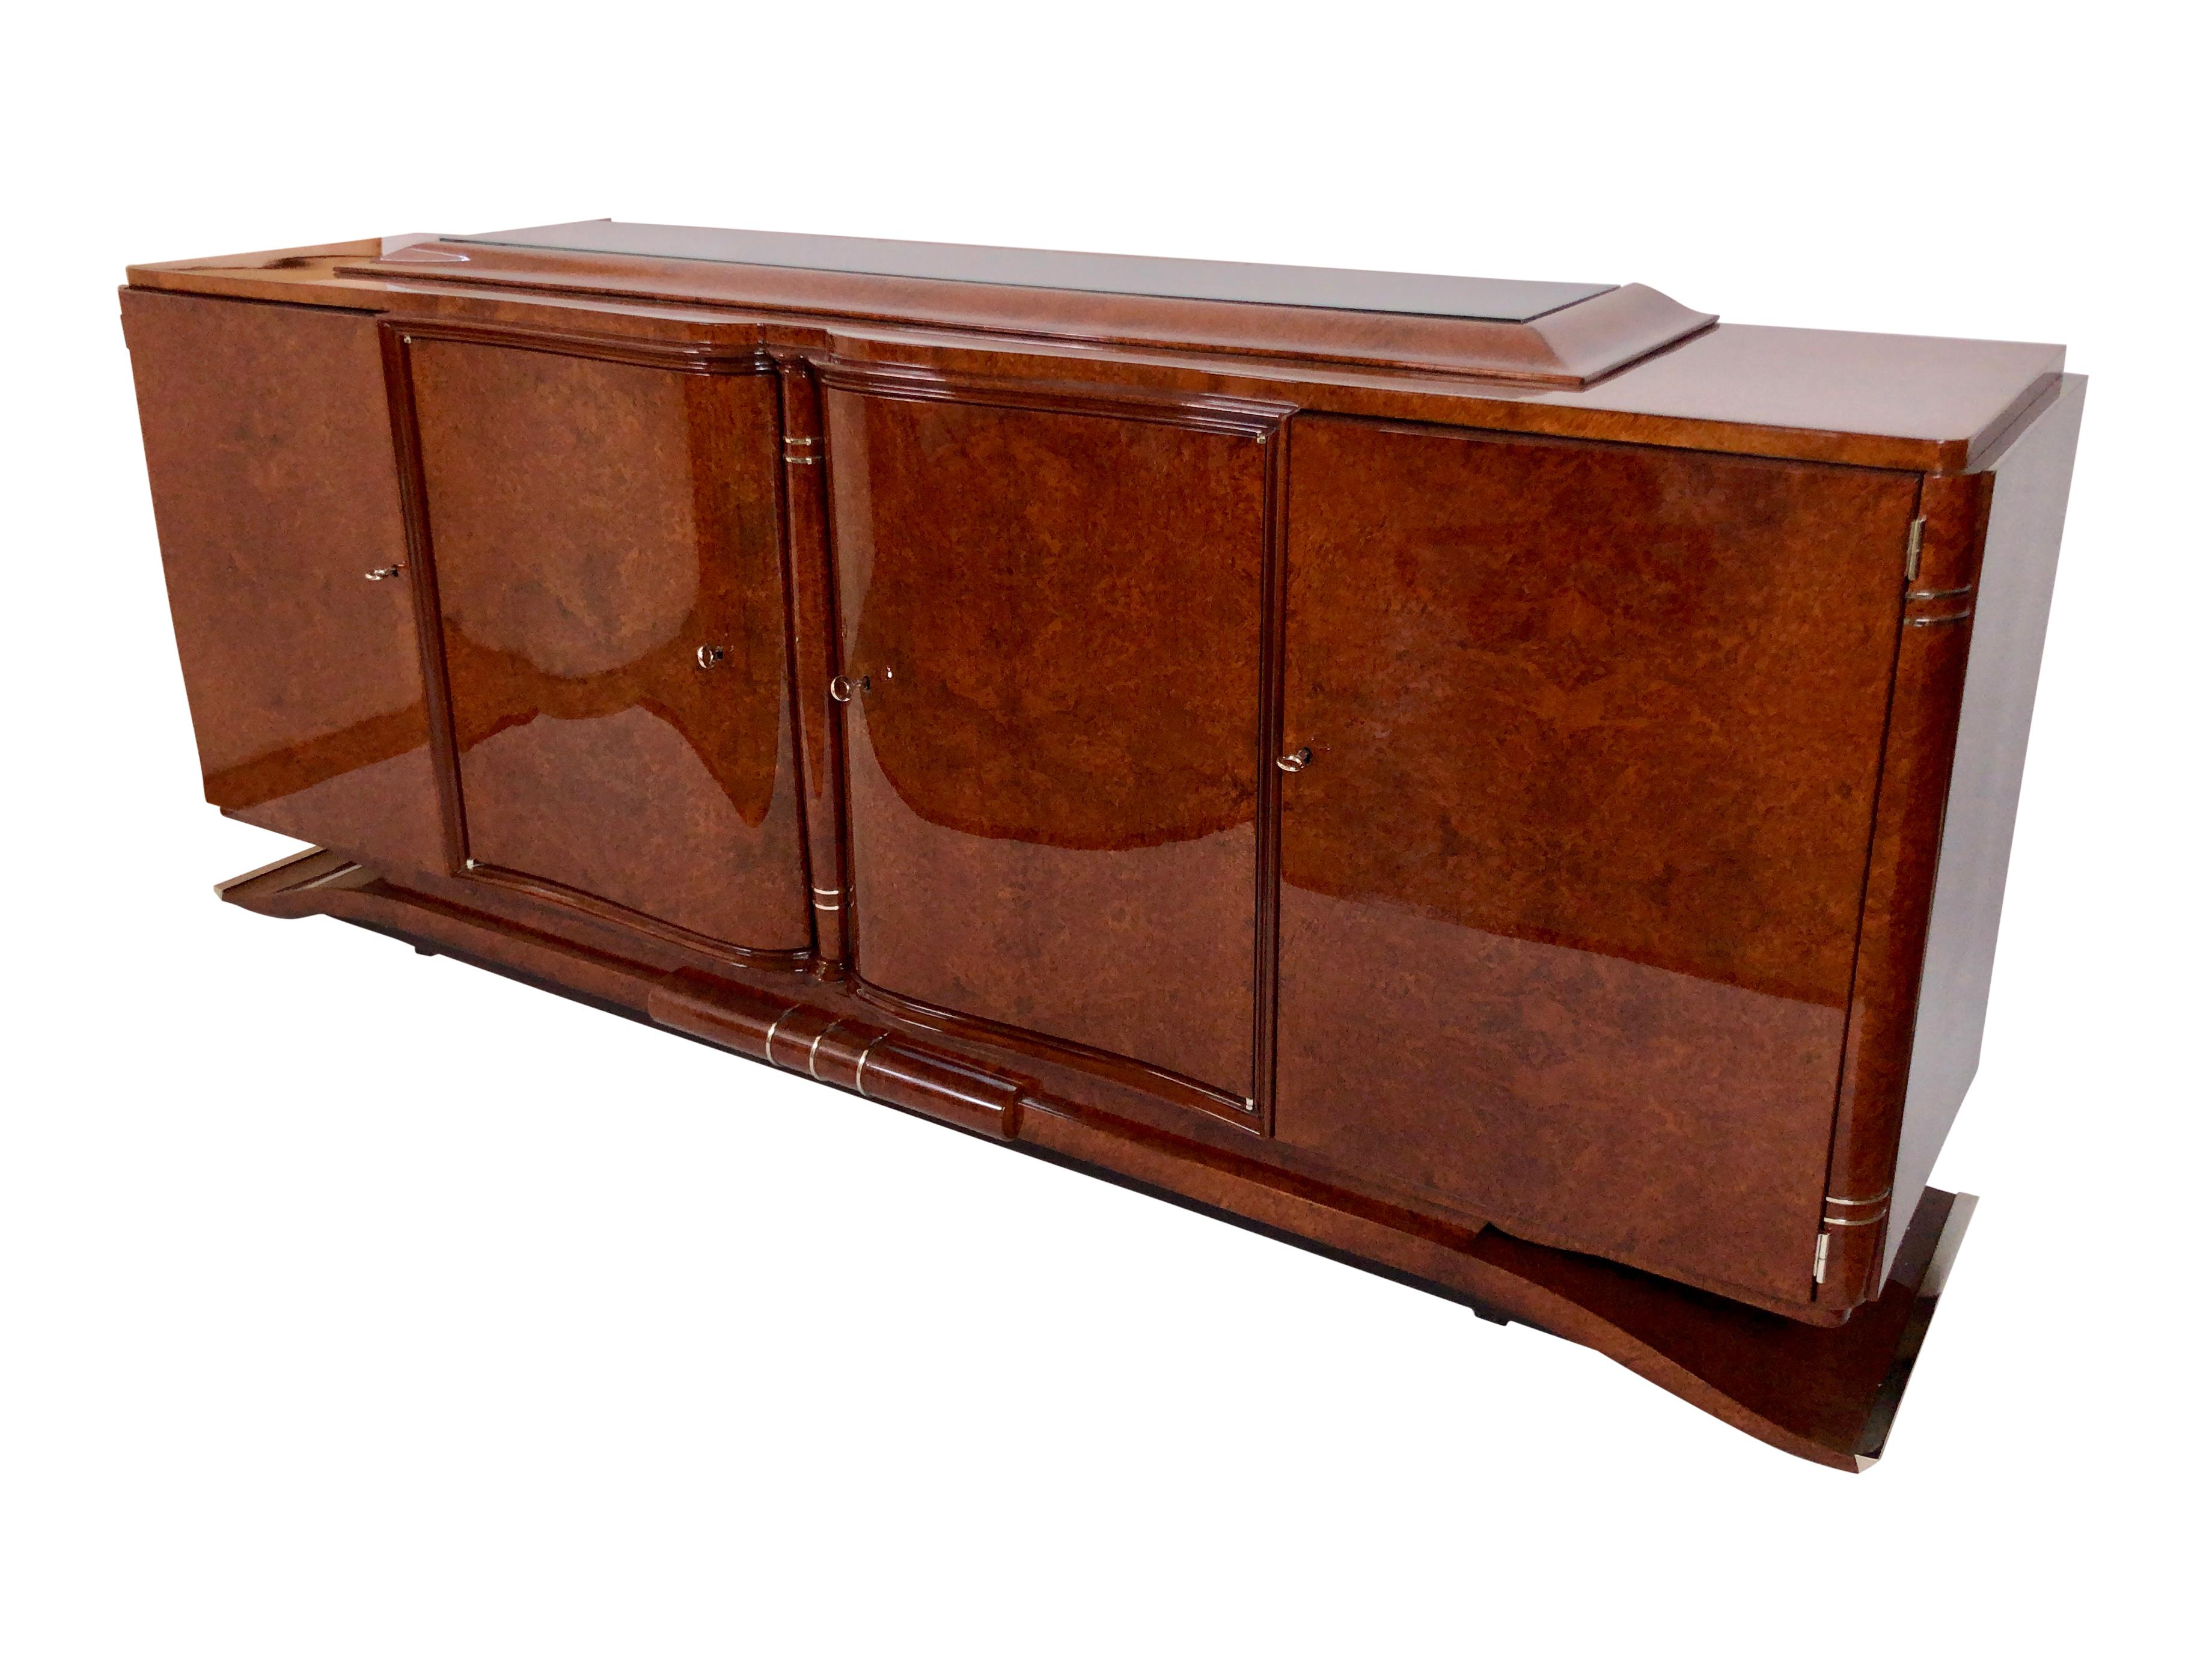 20th Century 1930s French Art Deco Sideboard in Real Wood Veneer on a Moustache Foot For Sale